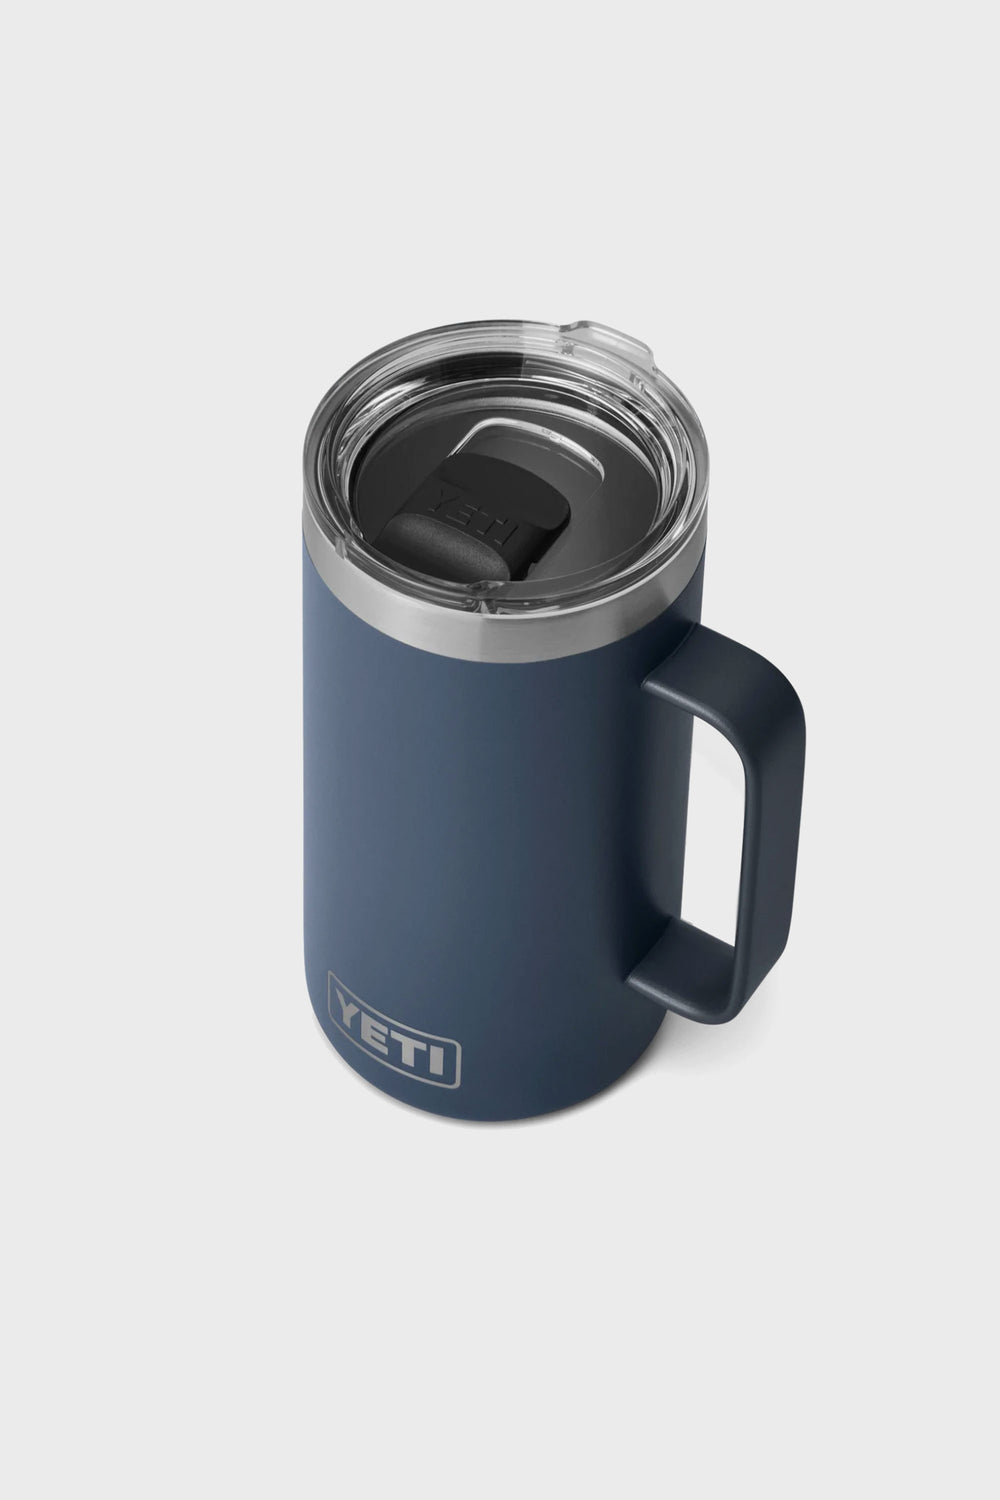 YETI Elements Drinkware Collection